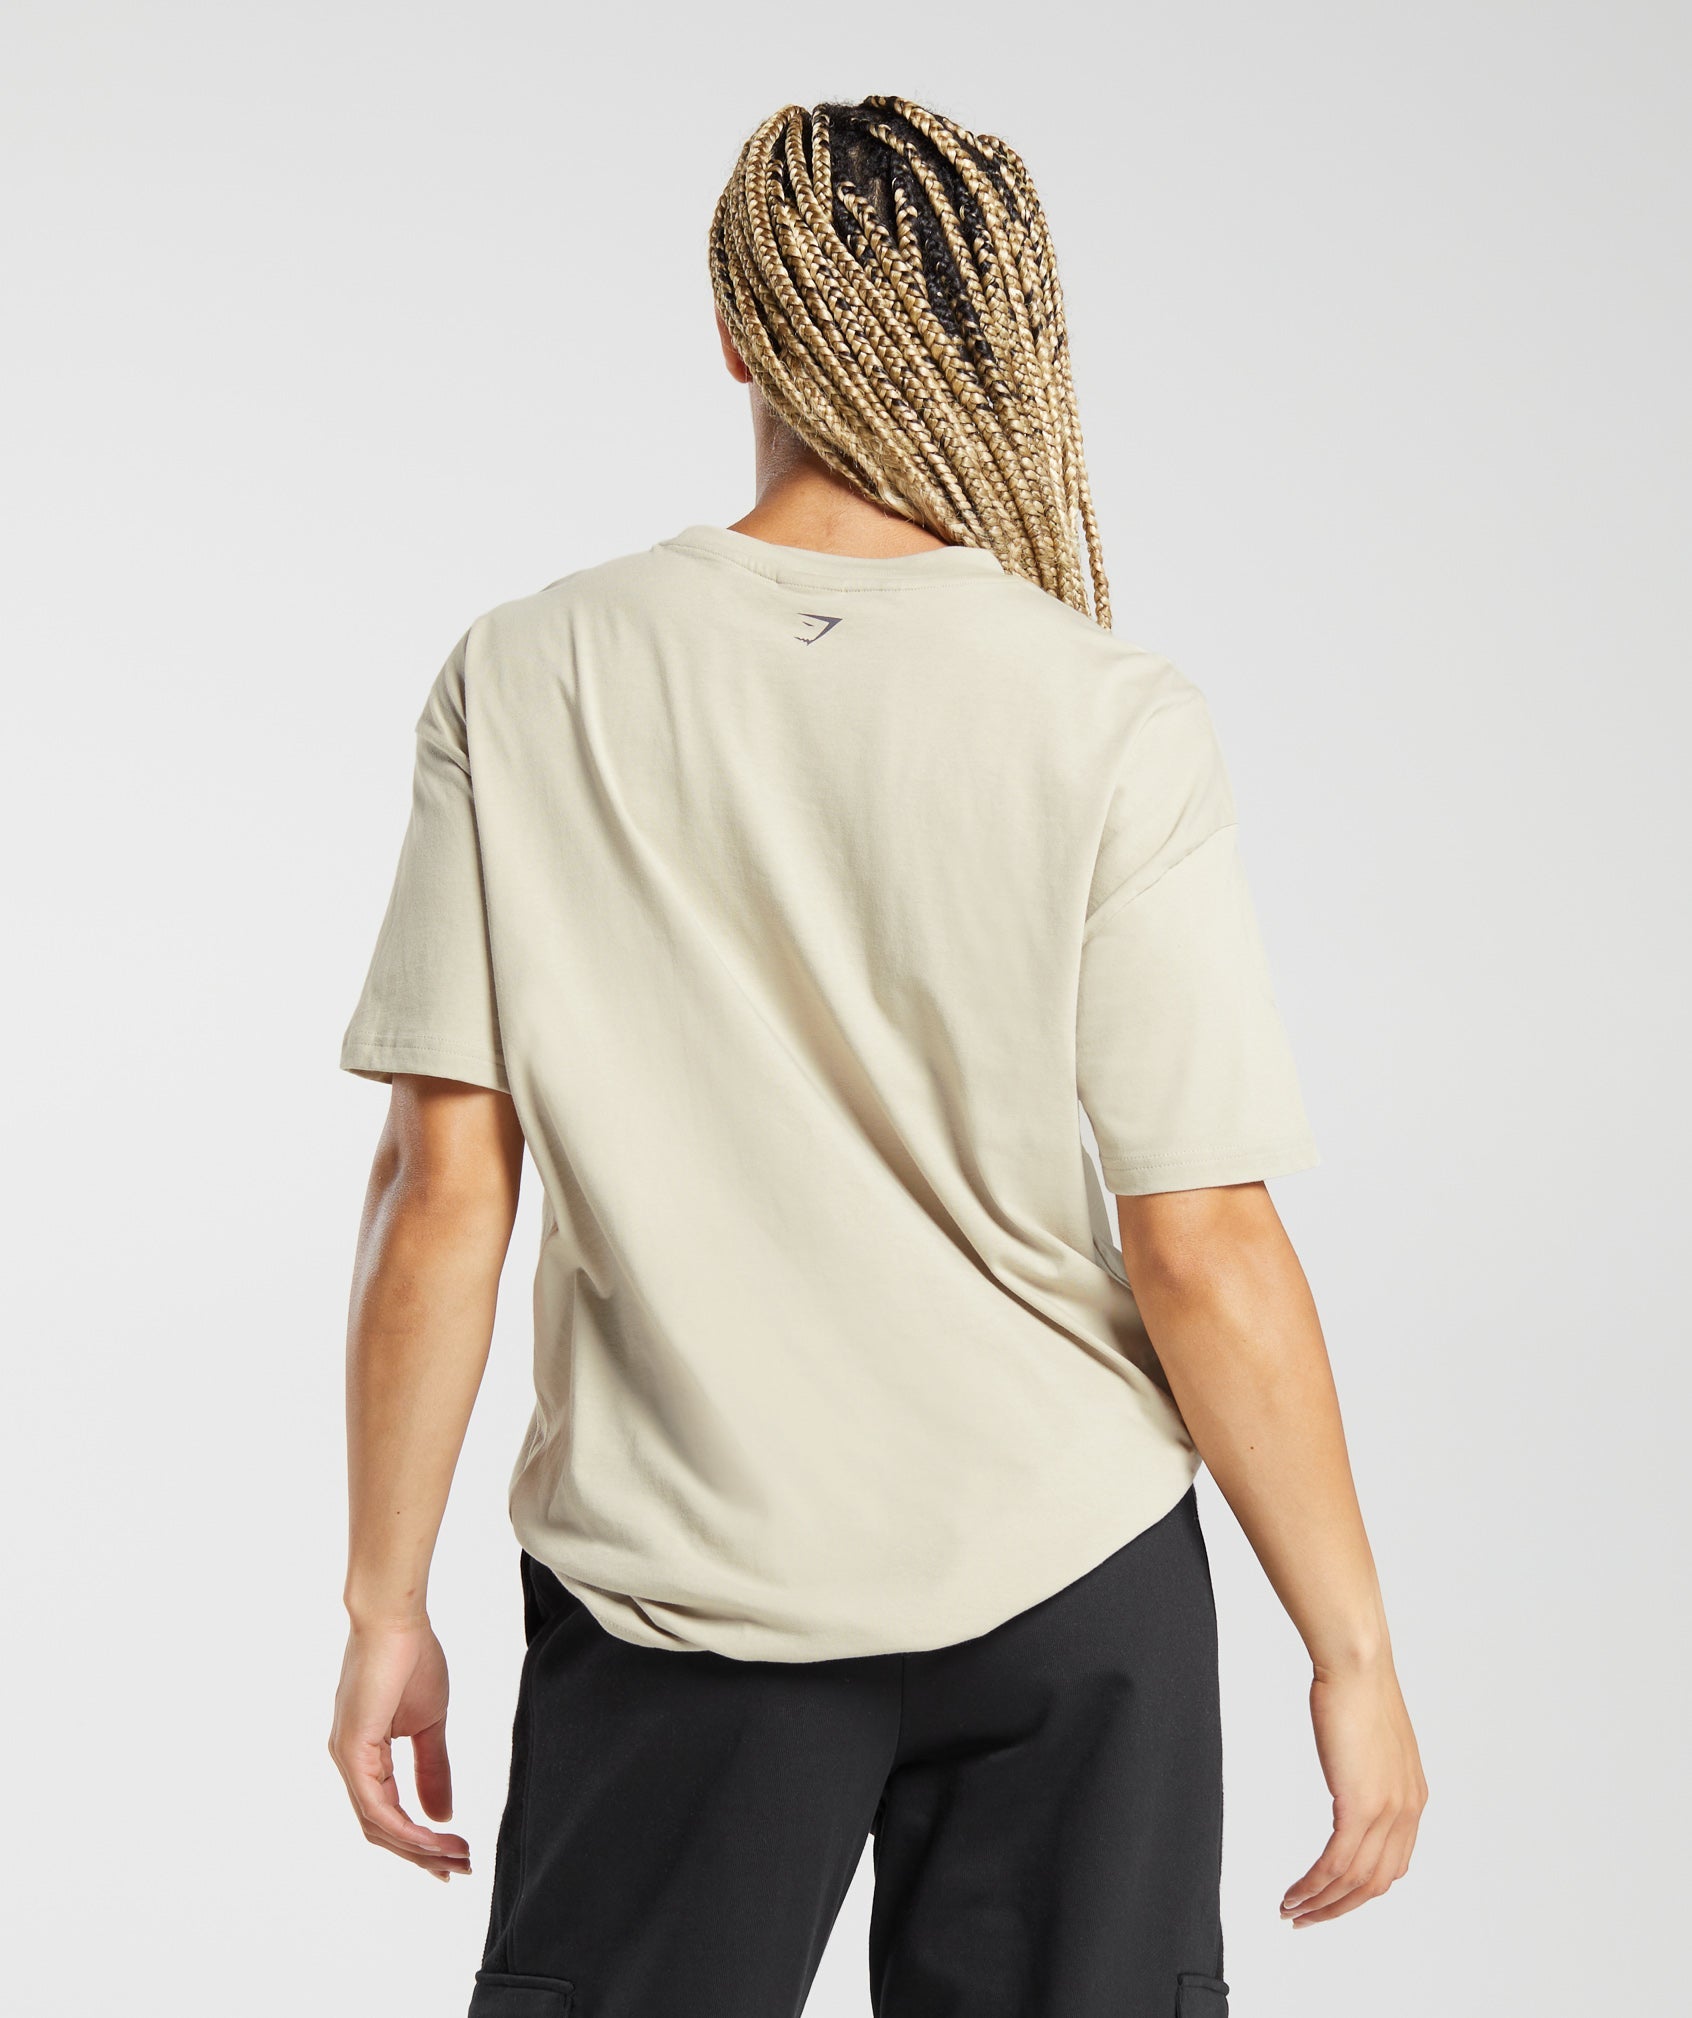 Lifting Apparel Oversized T-Shirt in Washed Stone Brown - view 2